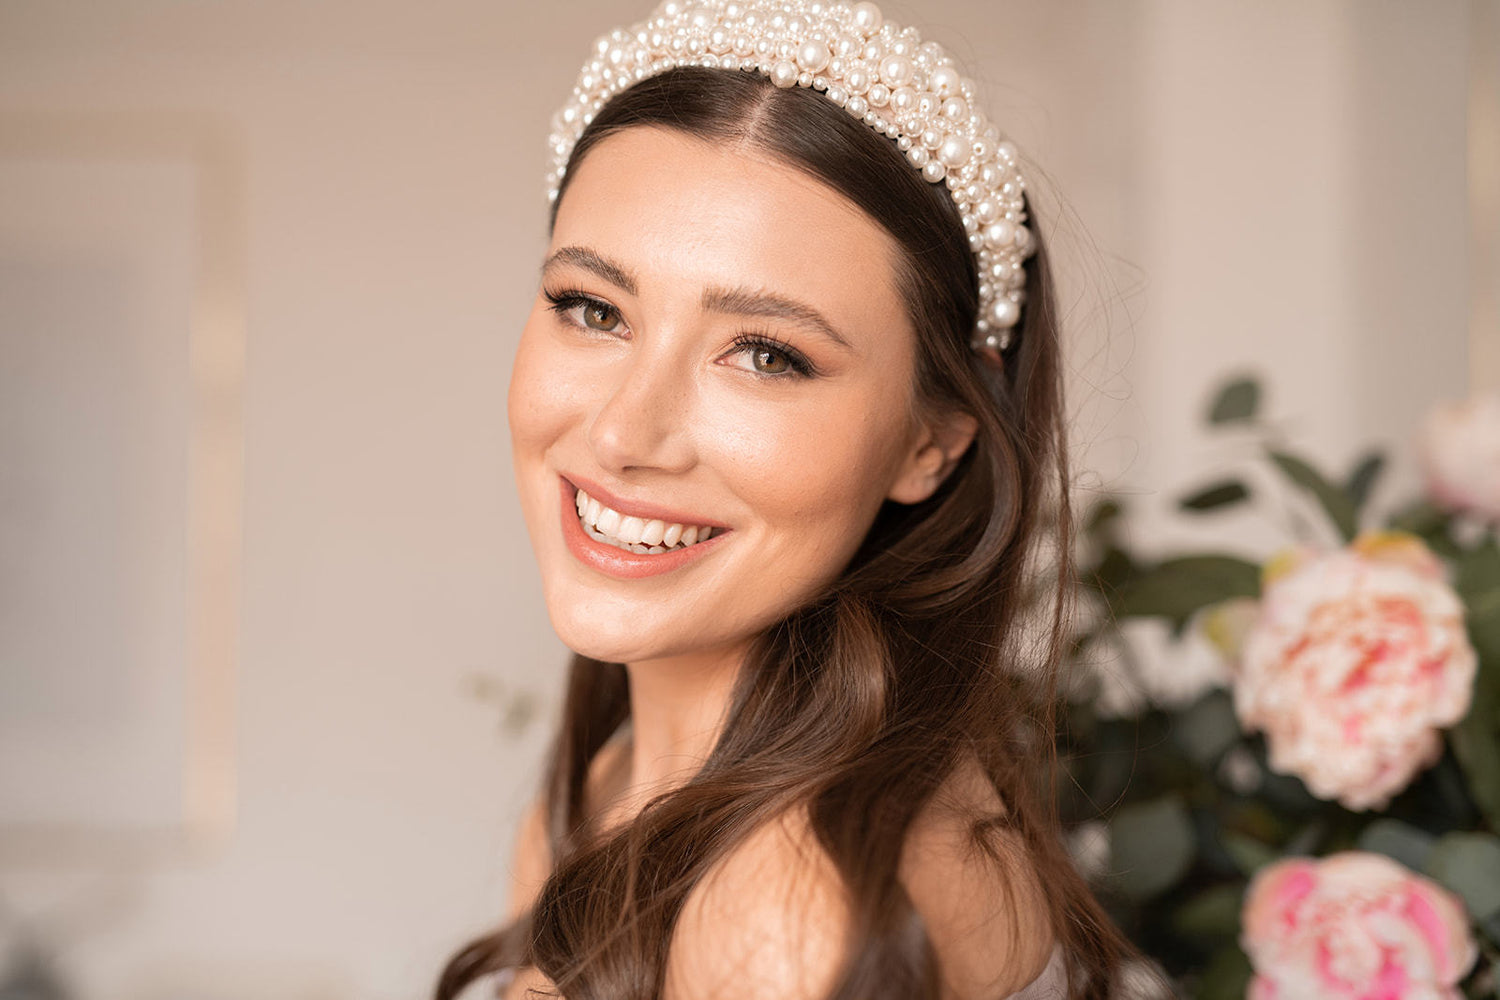 Brunette bridal model smiling while looking down the length while wearing our Devoted Luxe 'Ava' Pearl Headband